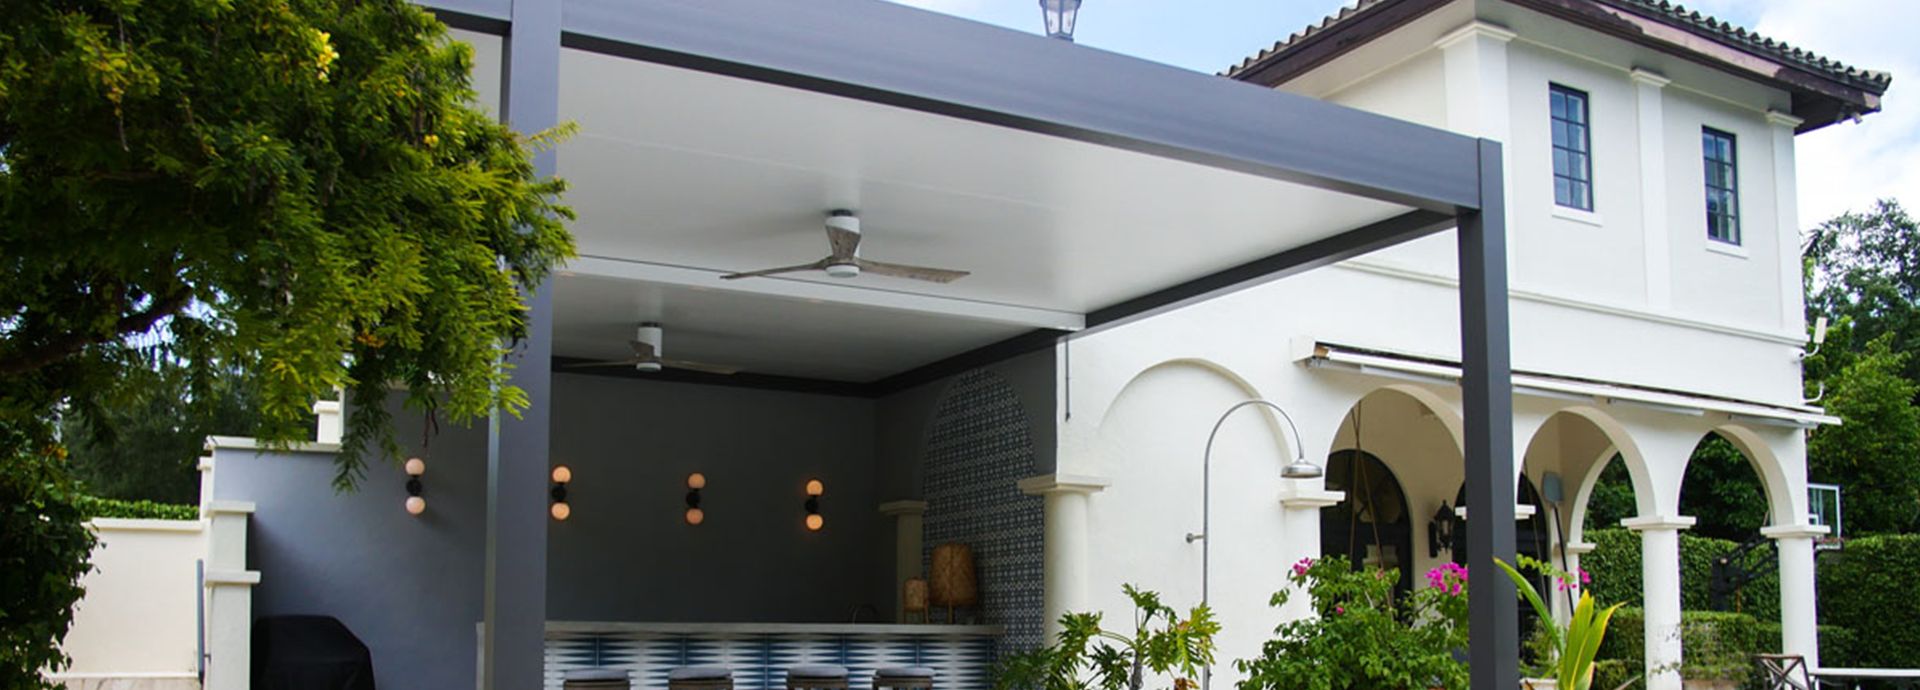 Insulatd Roof pergola R-Shade y one of the three automated or manual pergolas manufactured by Azenco Outdoor.